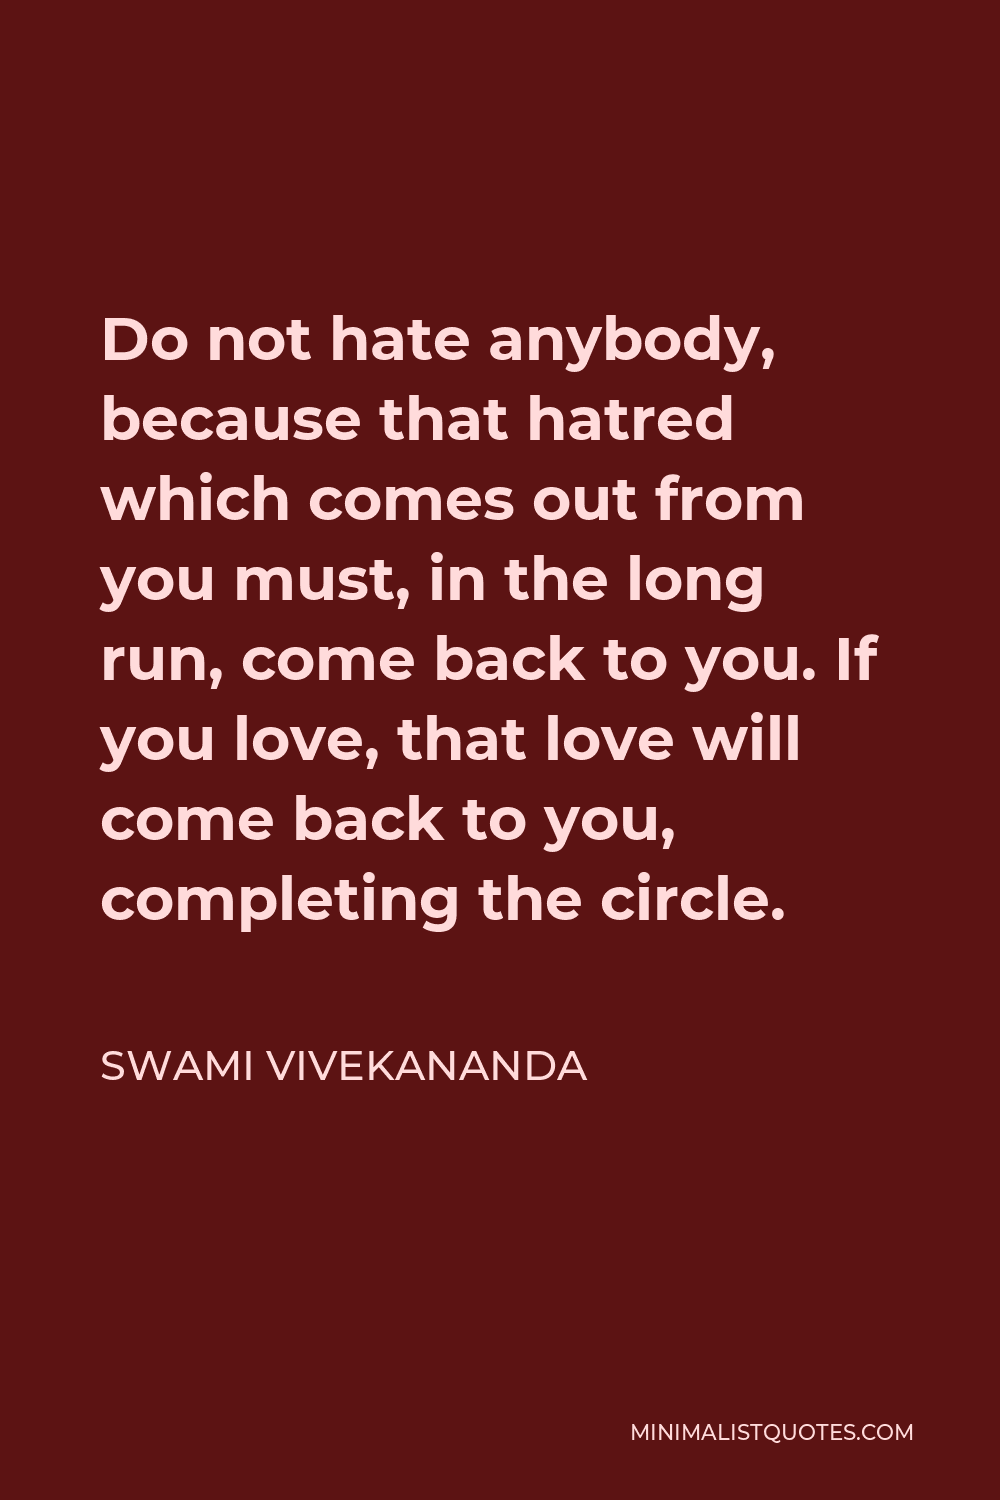 Swami Vivekananda Quote - Do not hate anybody, because that hatred which comes out from you must, in the long run, come back to you. If you love, that love will come back to you, completing the circle.